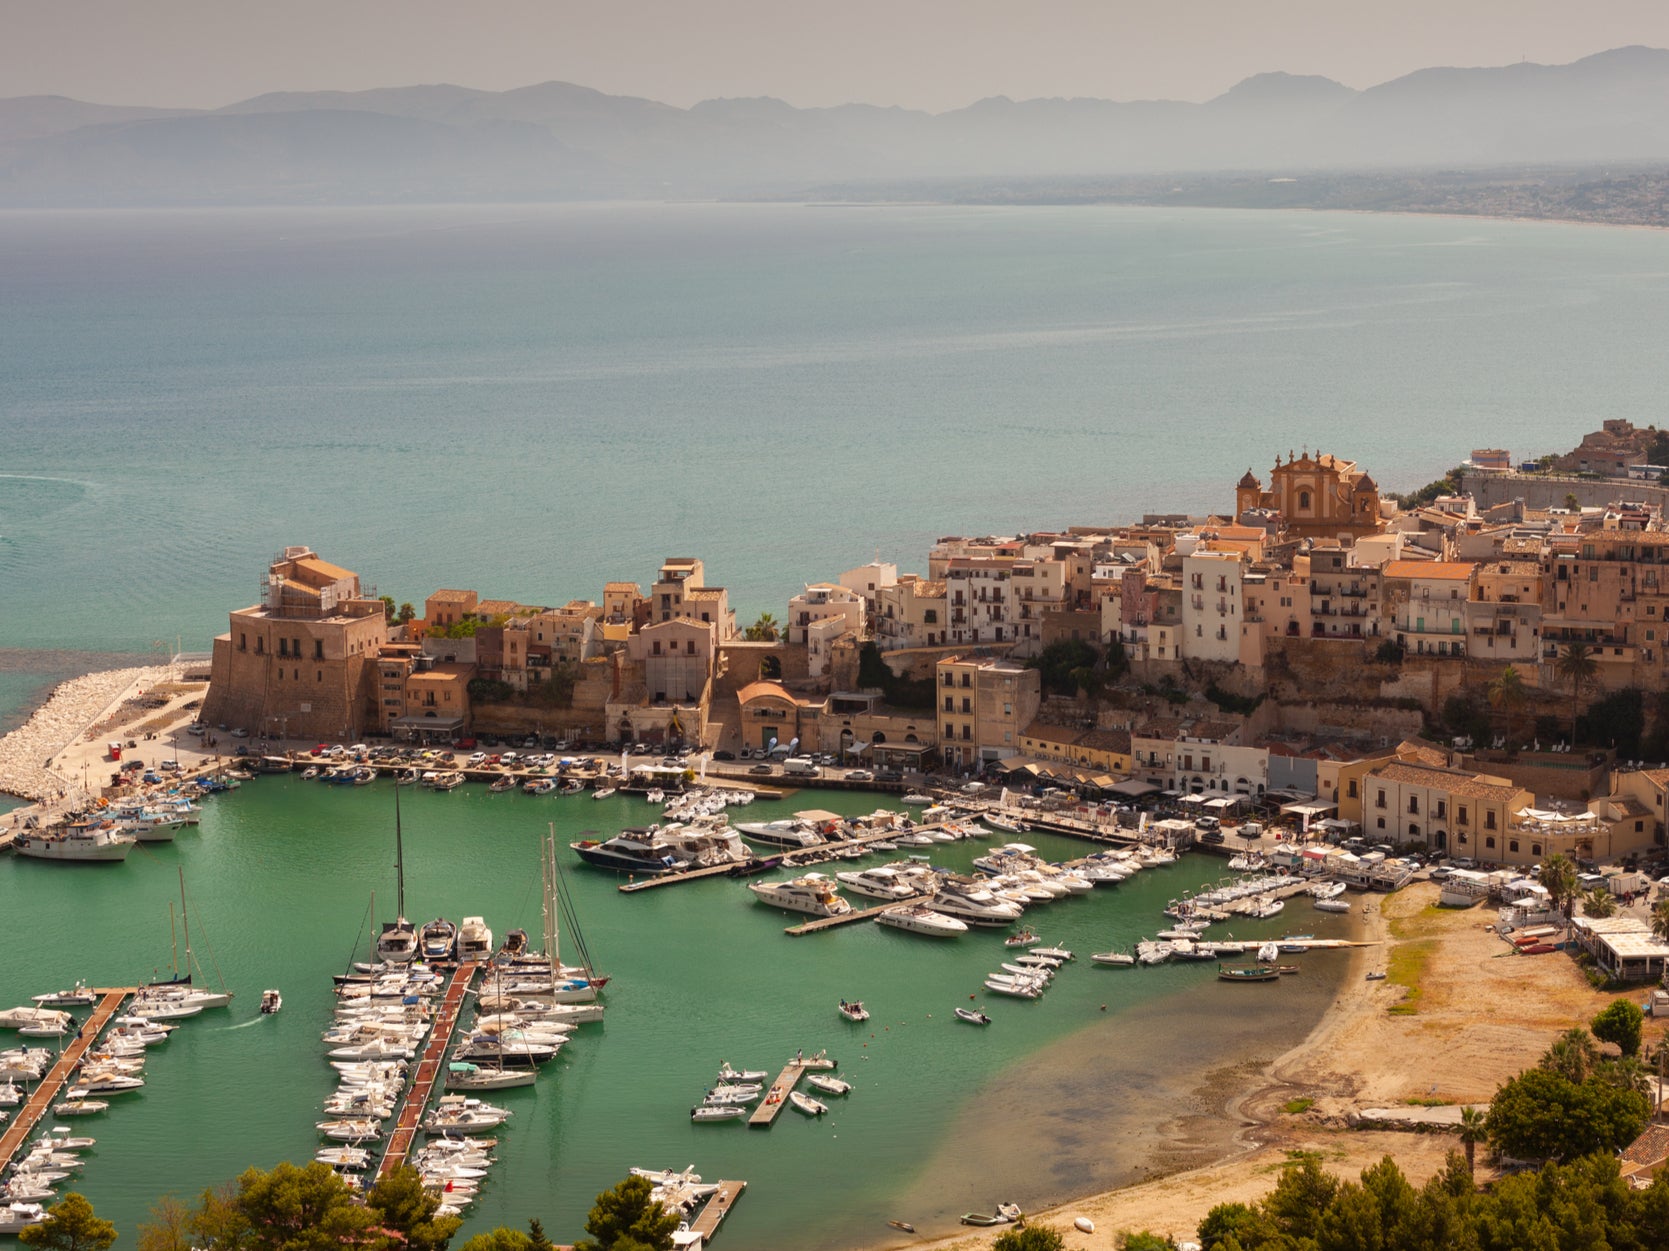 Built around an Arab fortress, this port town is a quiet coastal spot